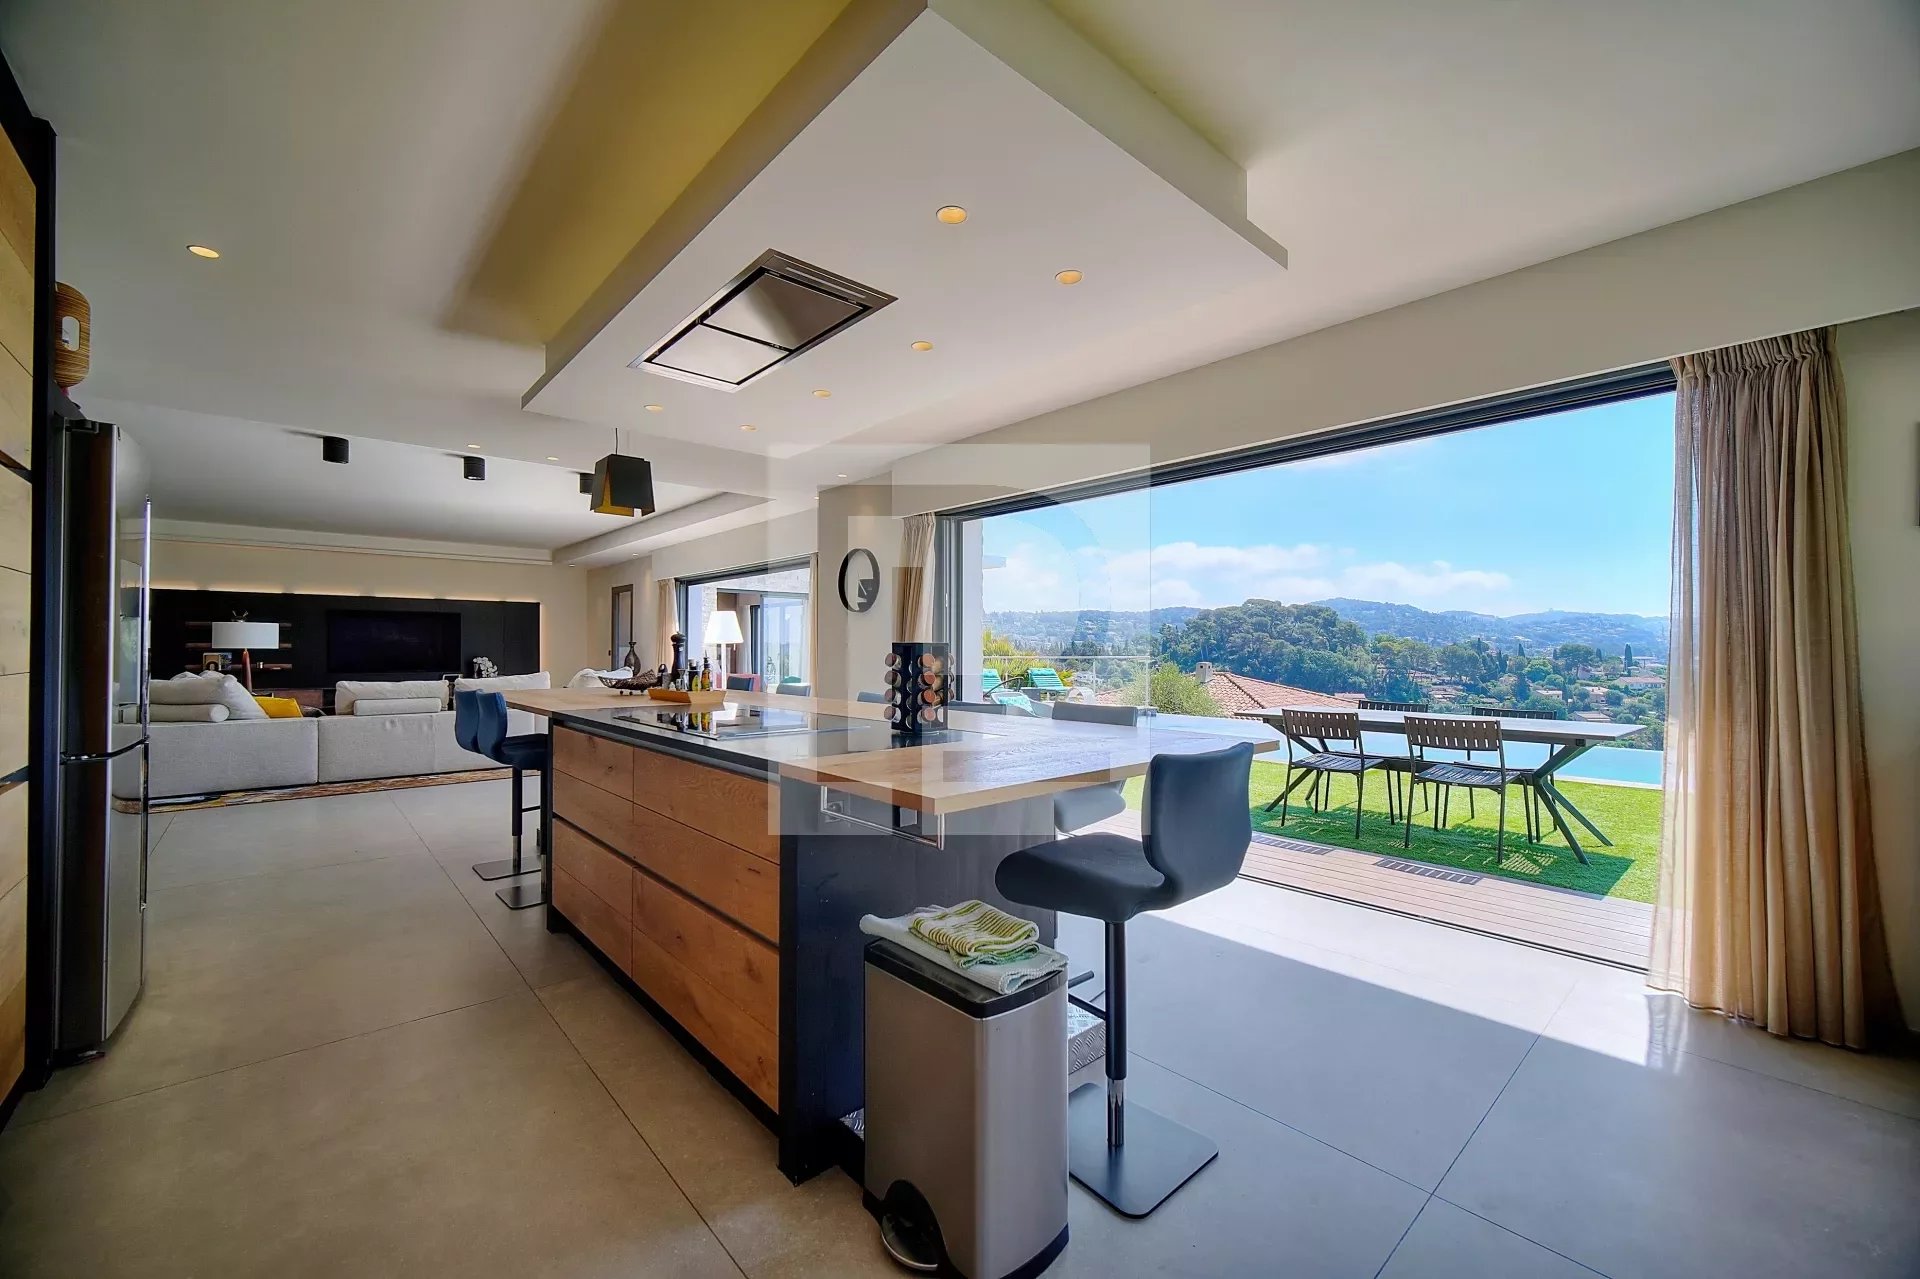 180 degree panoramic view for this superb modern